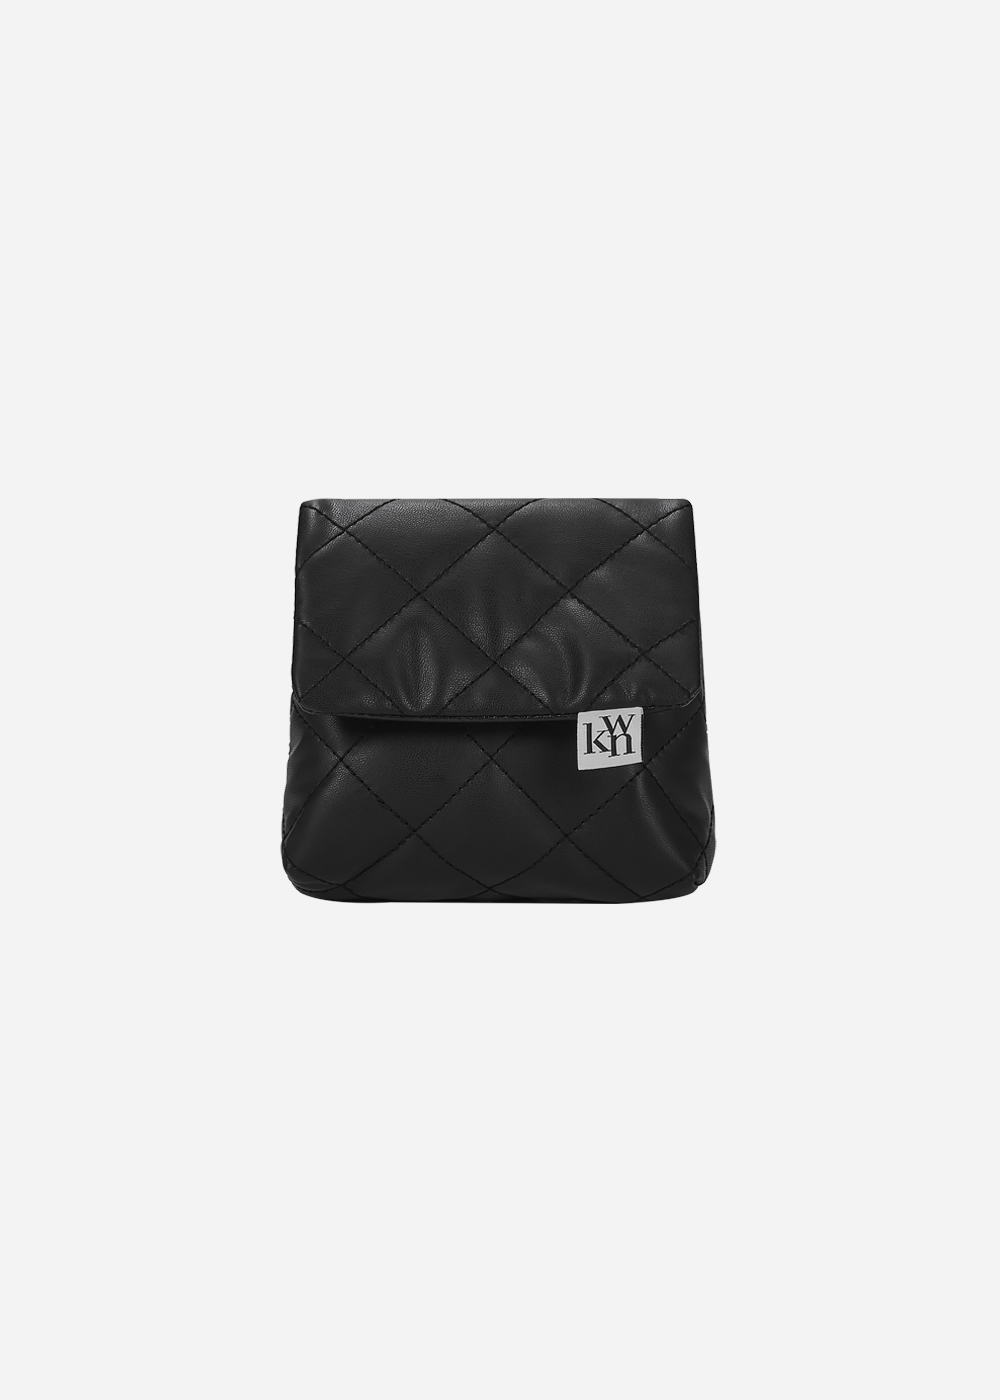 LYTS Pouch Black